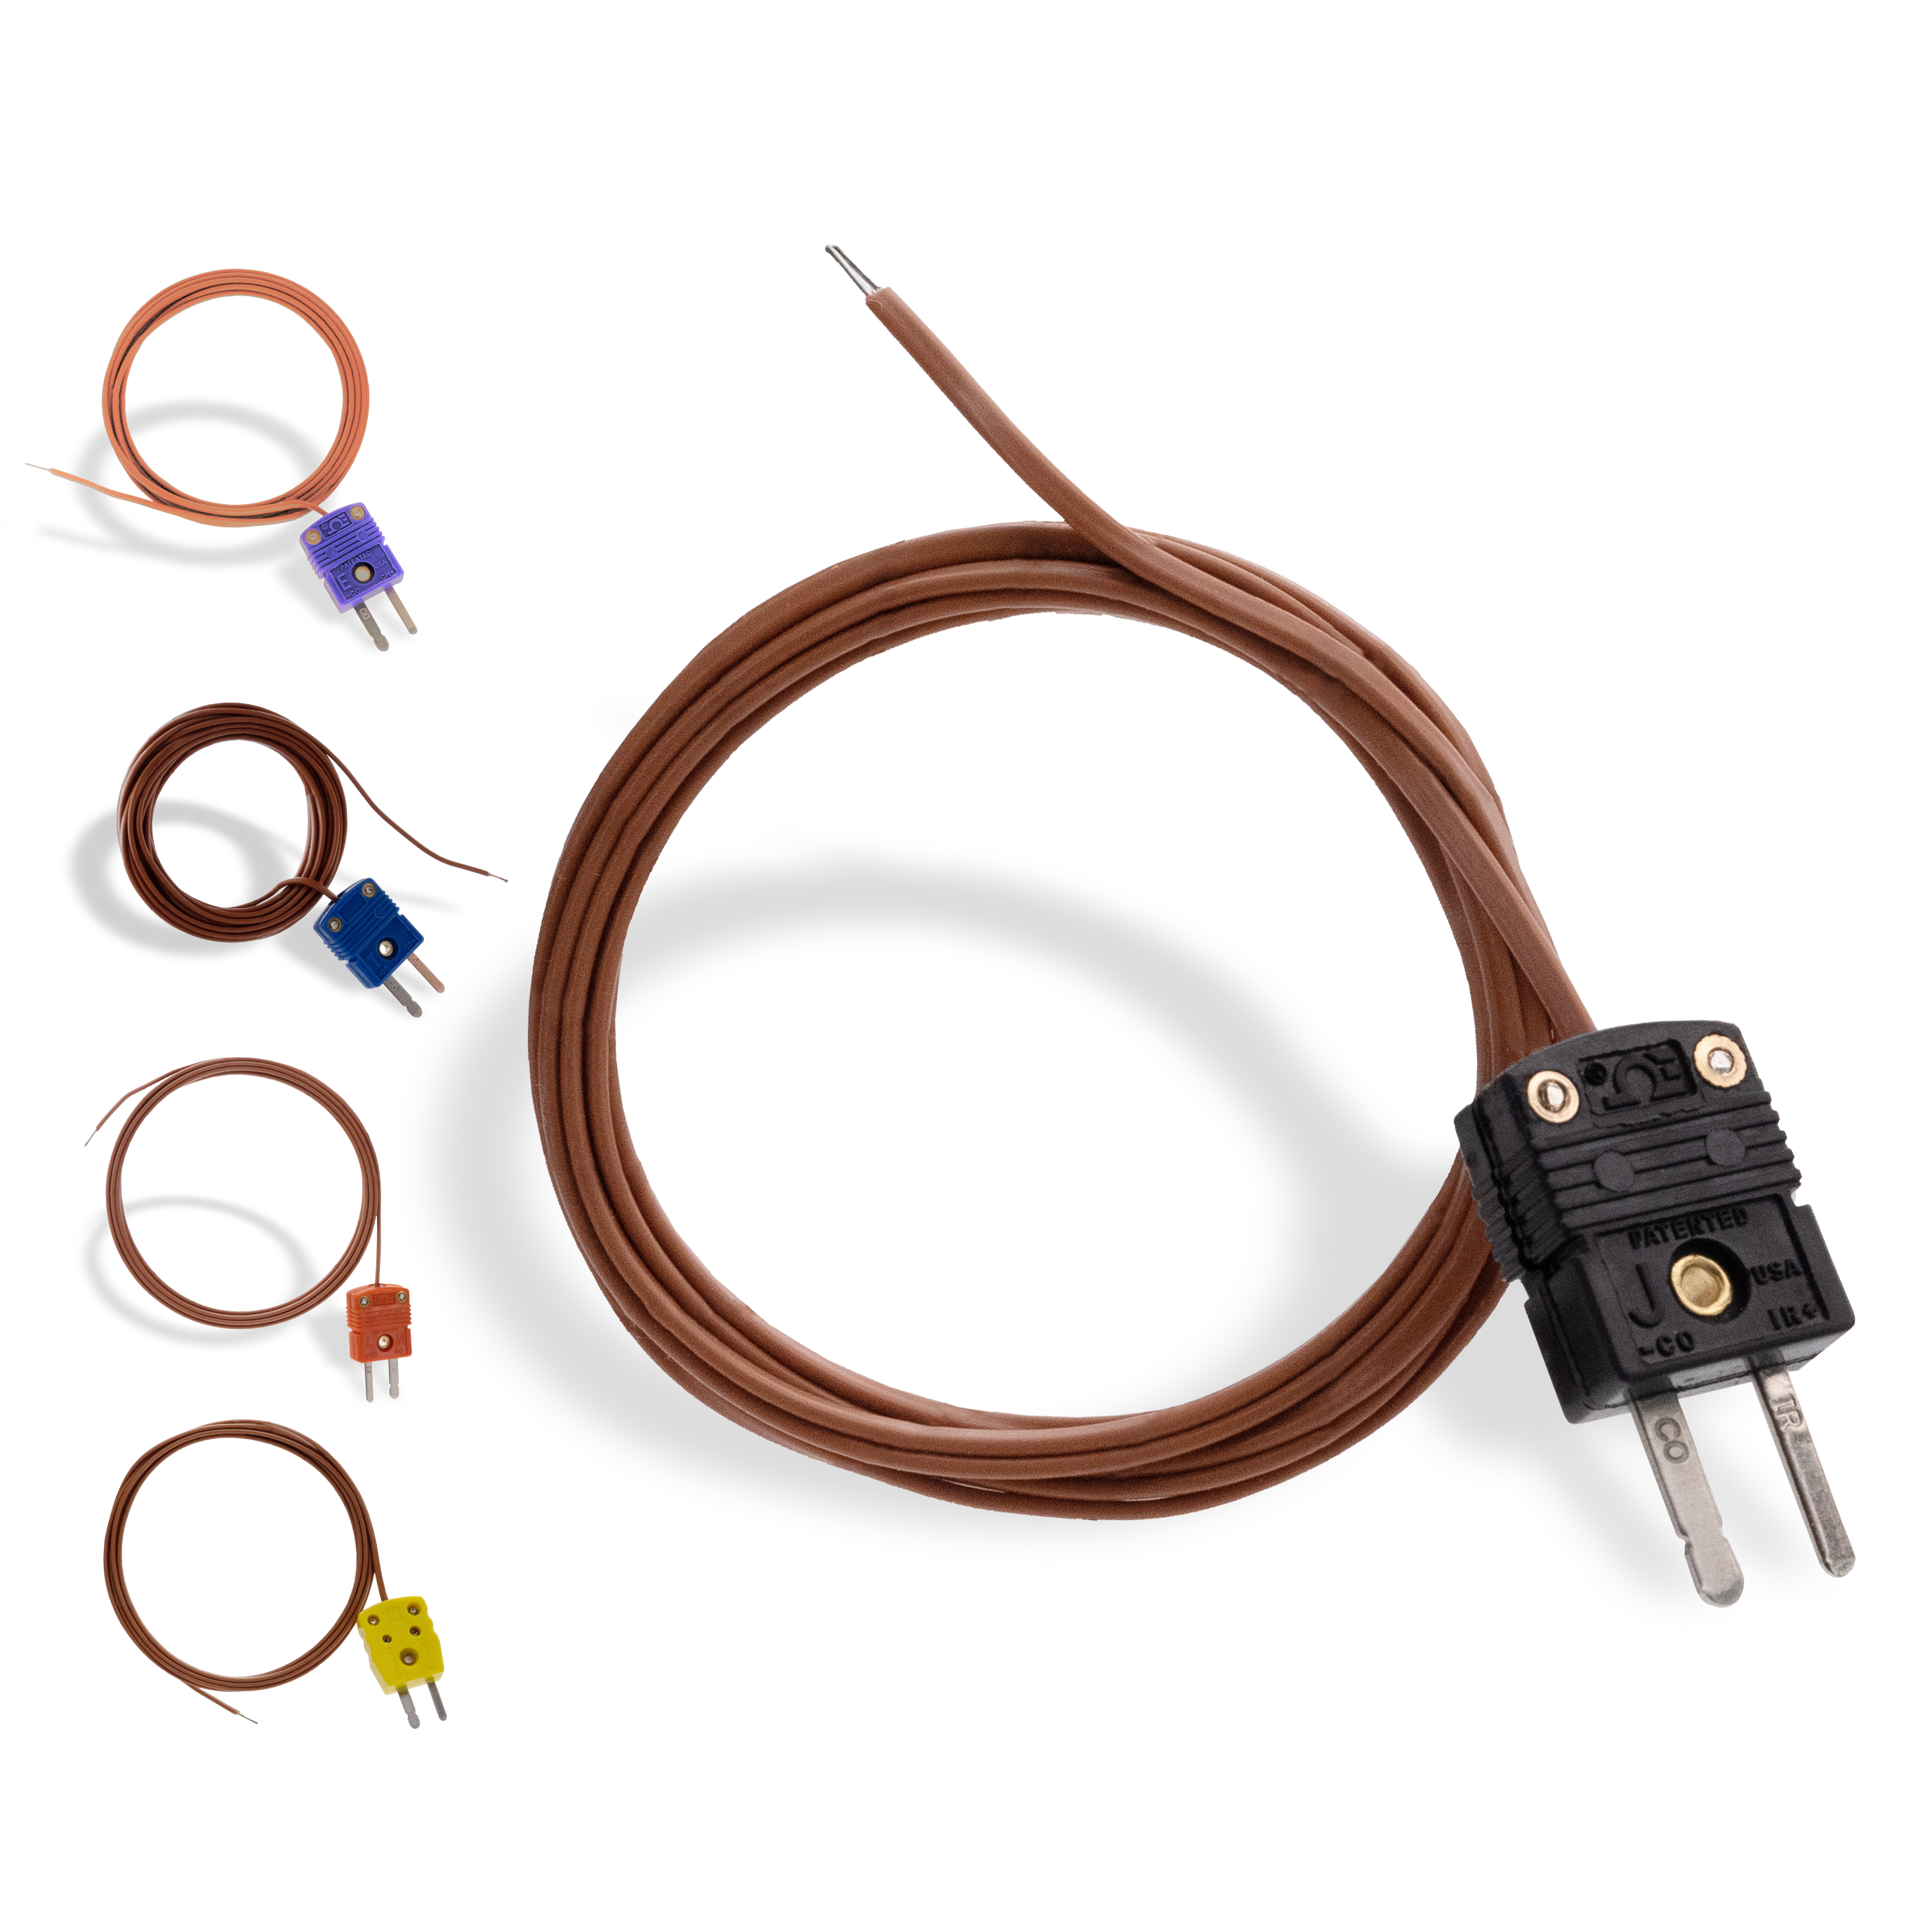 Type K, J, N, T and E thermocouple probe